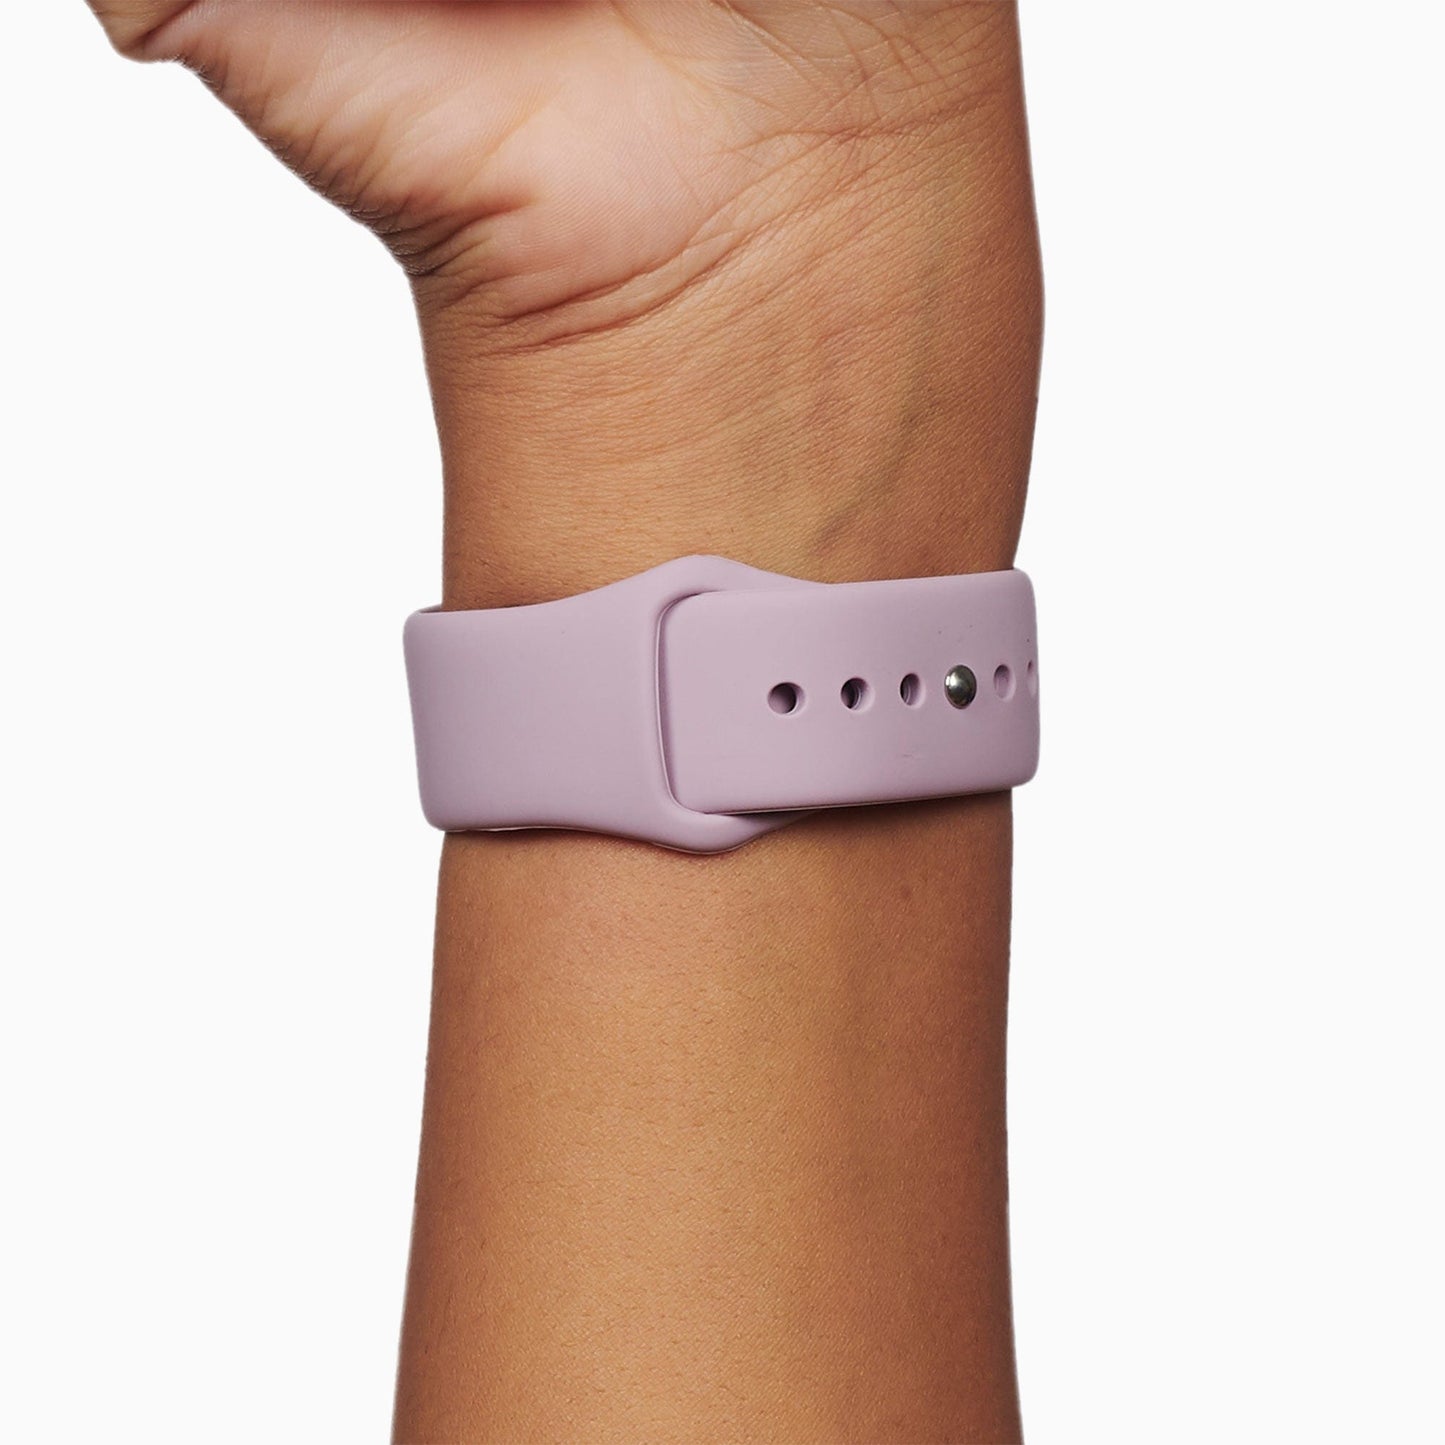 Lavender Sport Band for Apple Watch